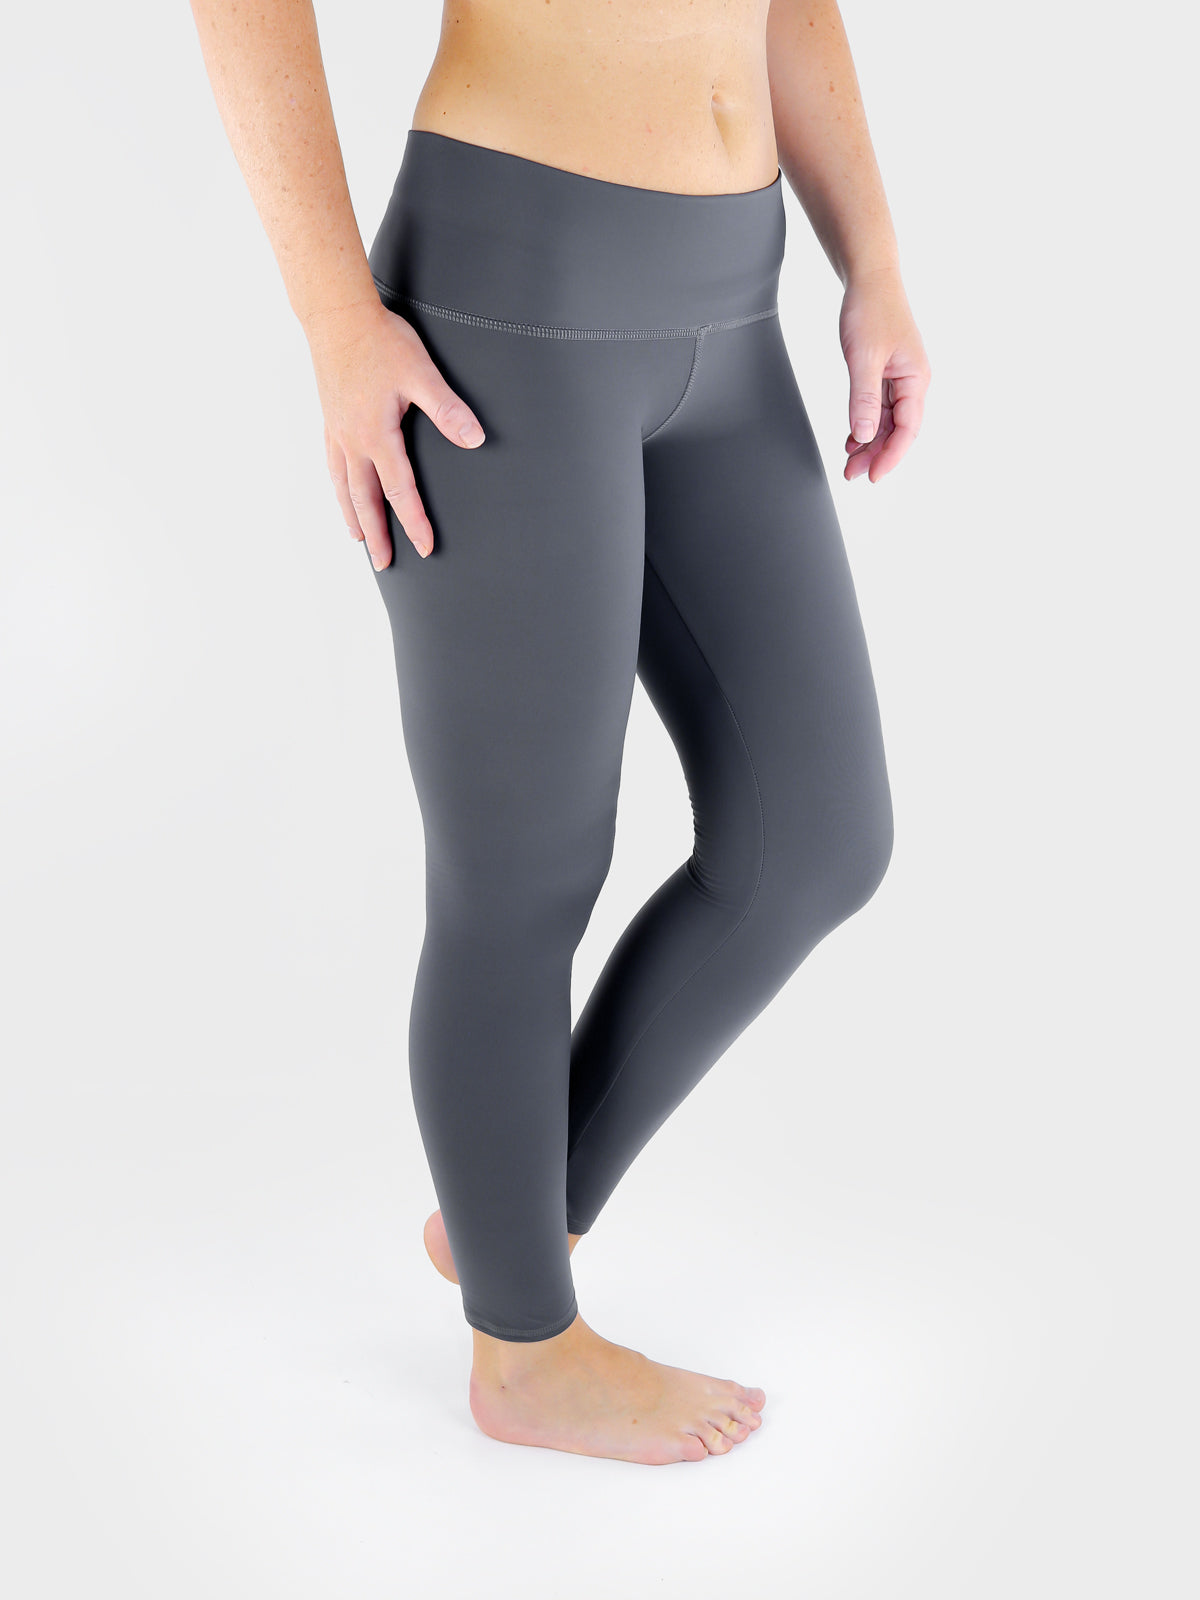 Grey Crop Super Low Waist Yoga Pants for Your Workout